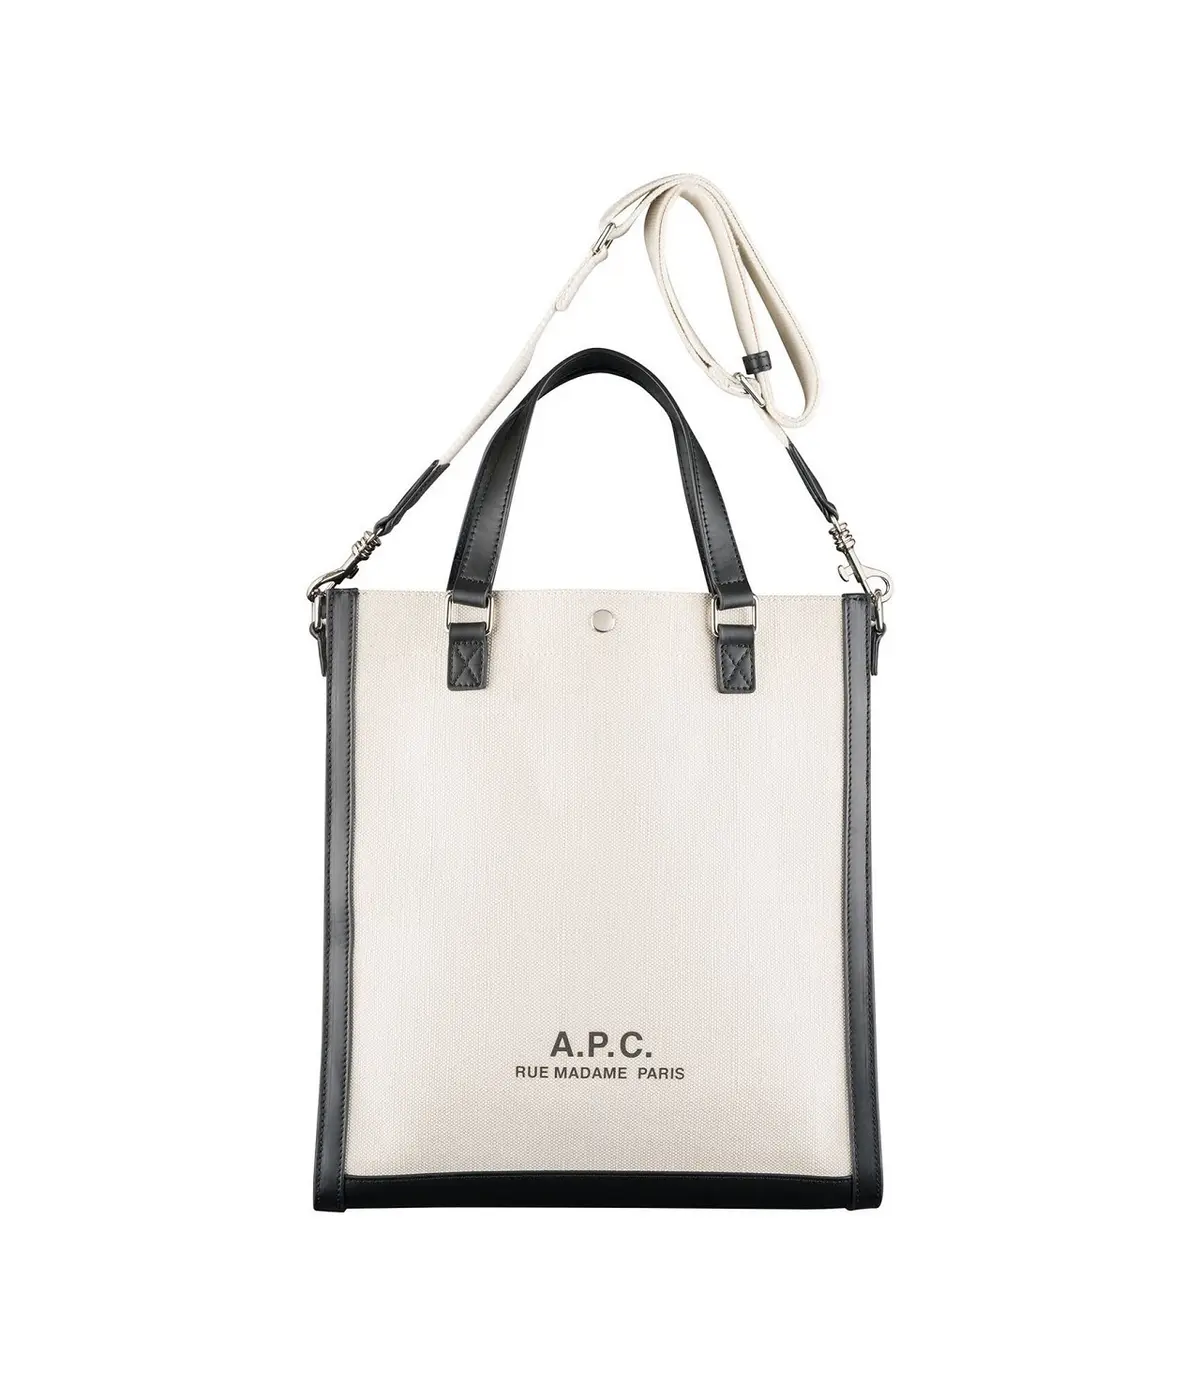 A.P.C.　モノトーンバイカラートートバッグ　ジェンダーレスギフト